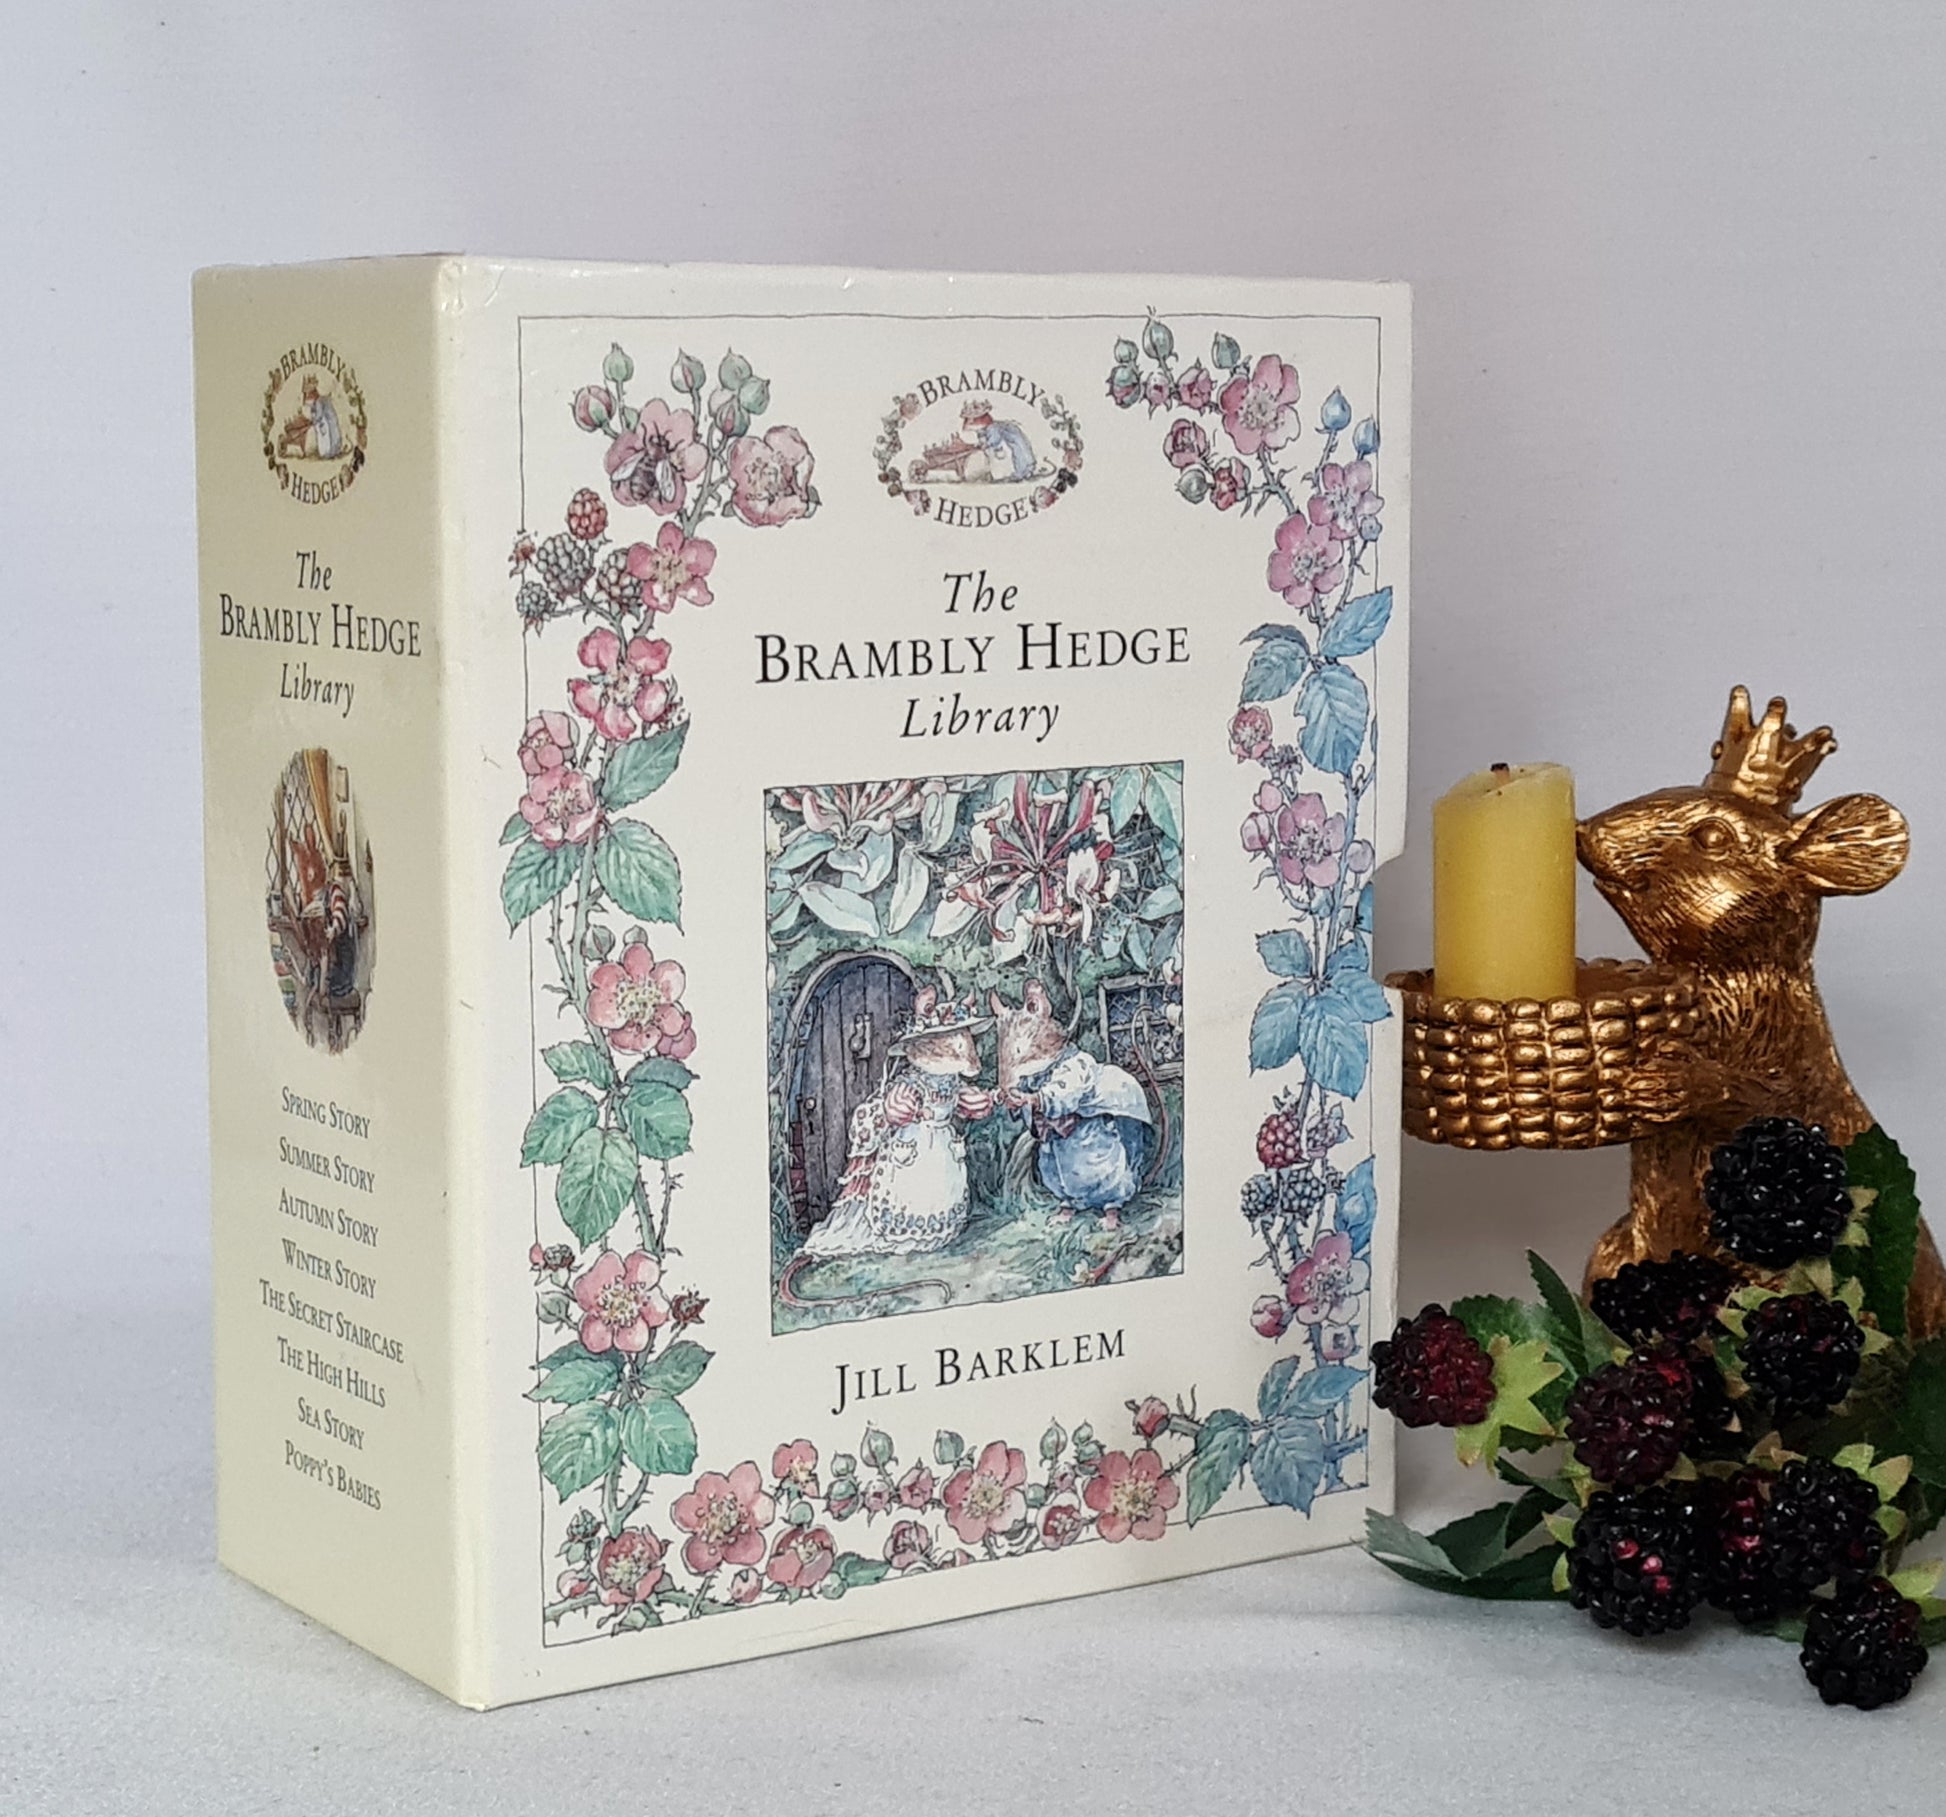 2000 The Brambly Hedge Collection by Jill Barklem / Spring, Summer